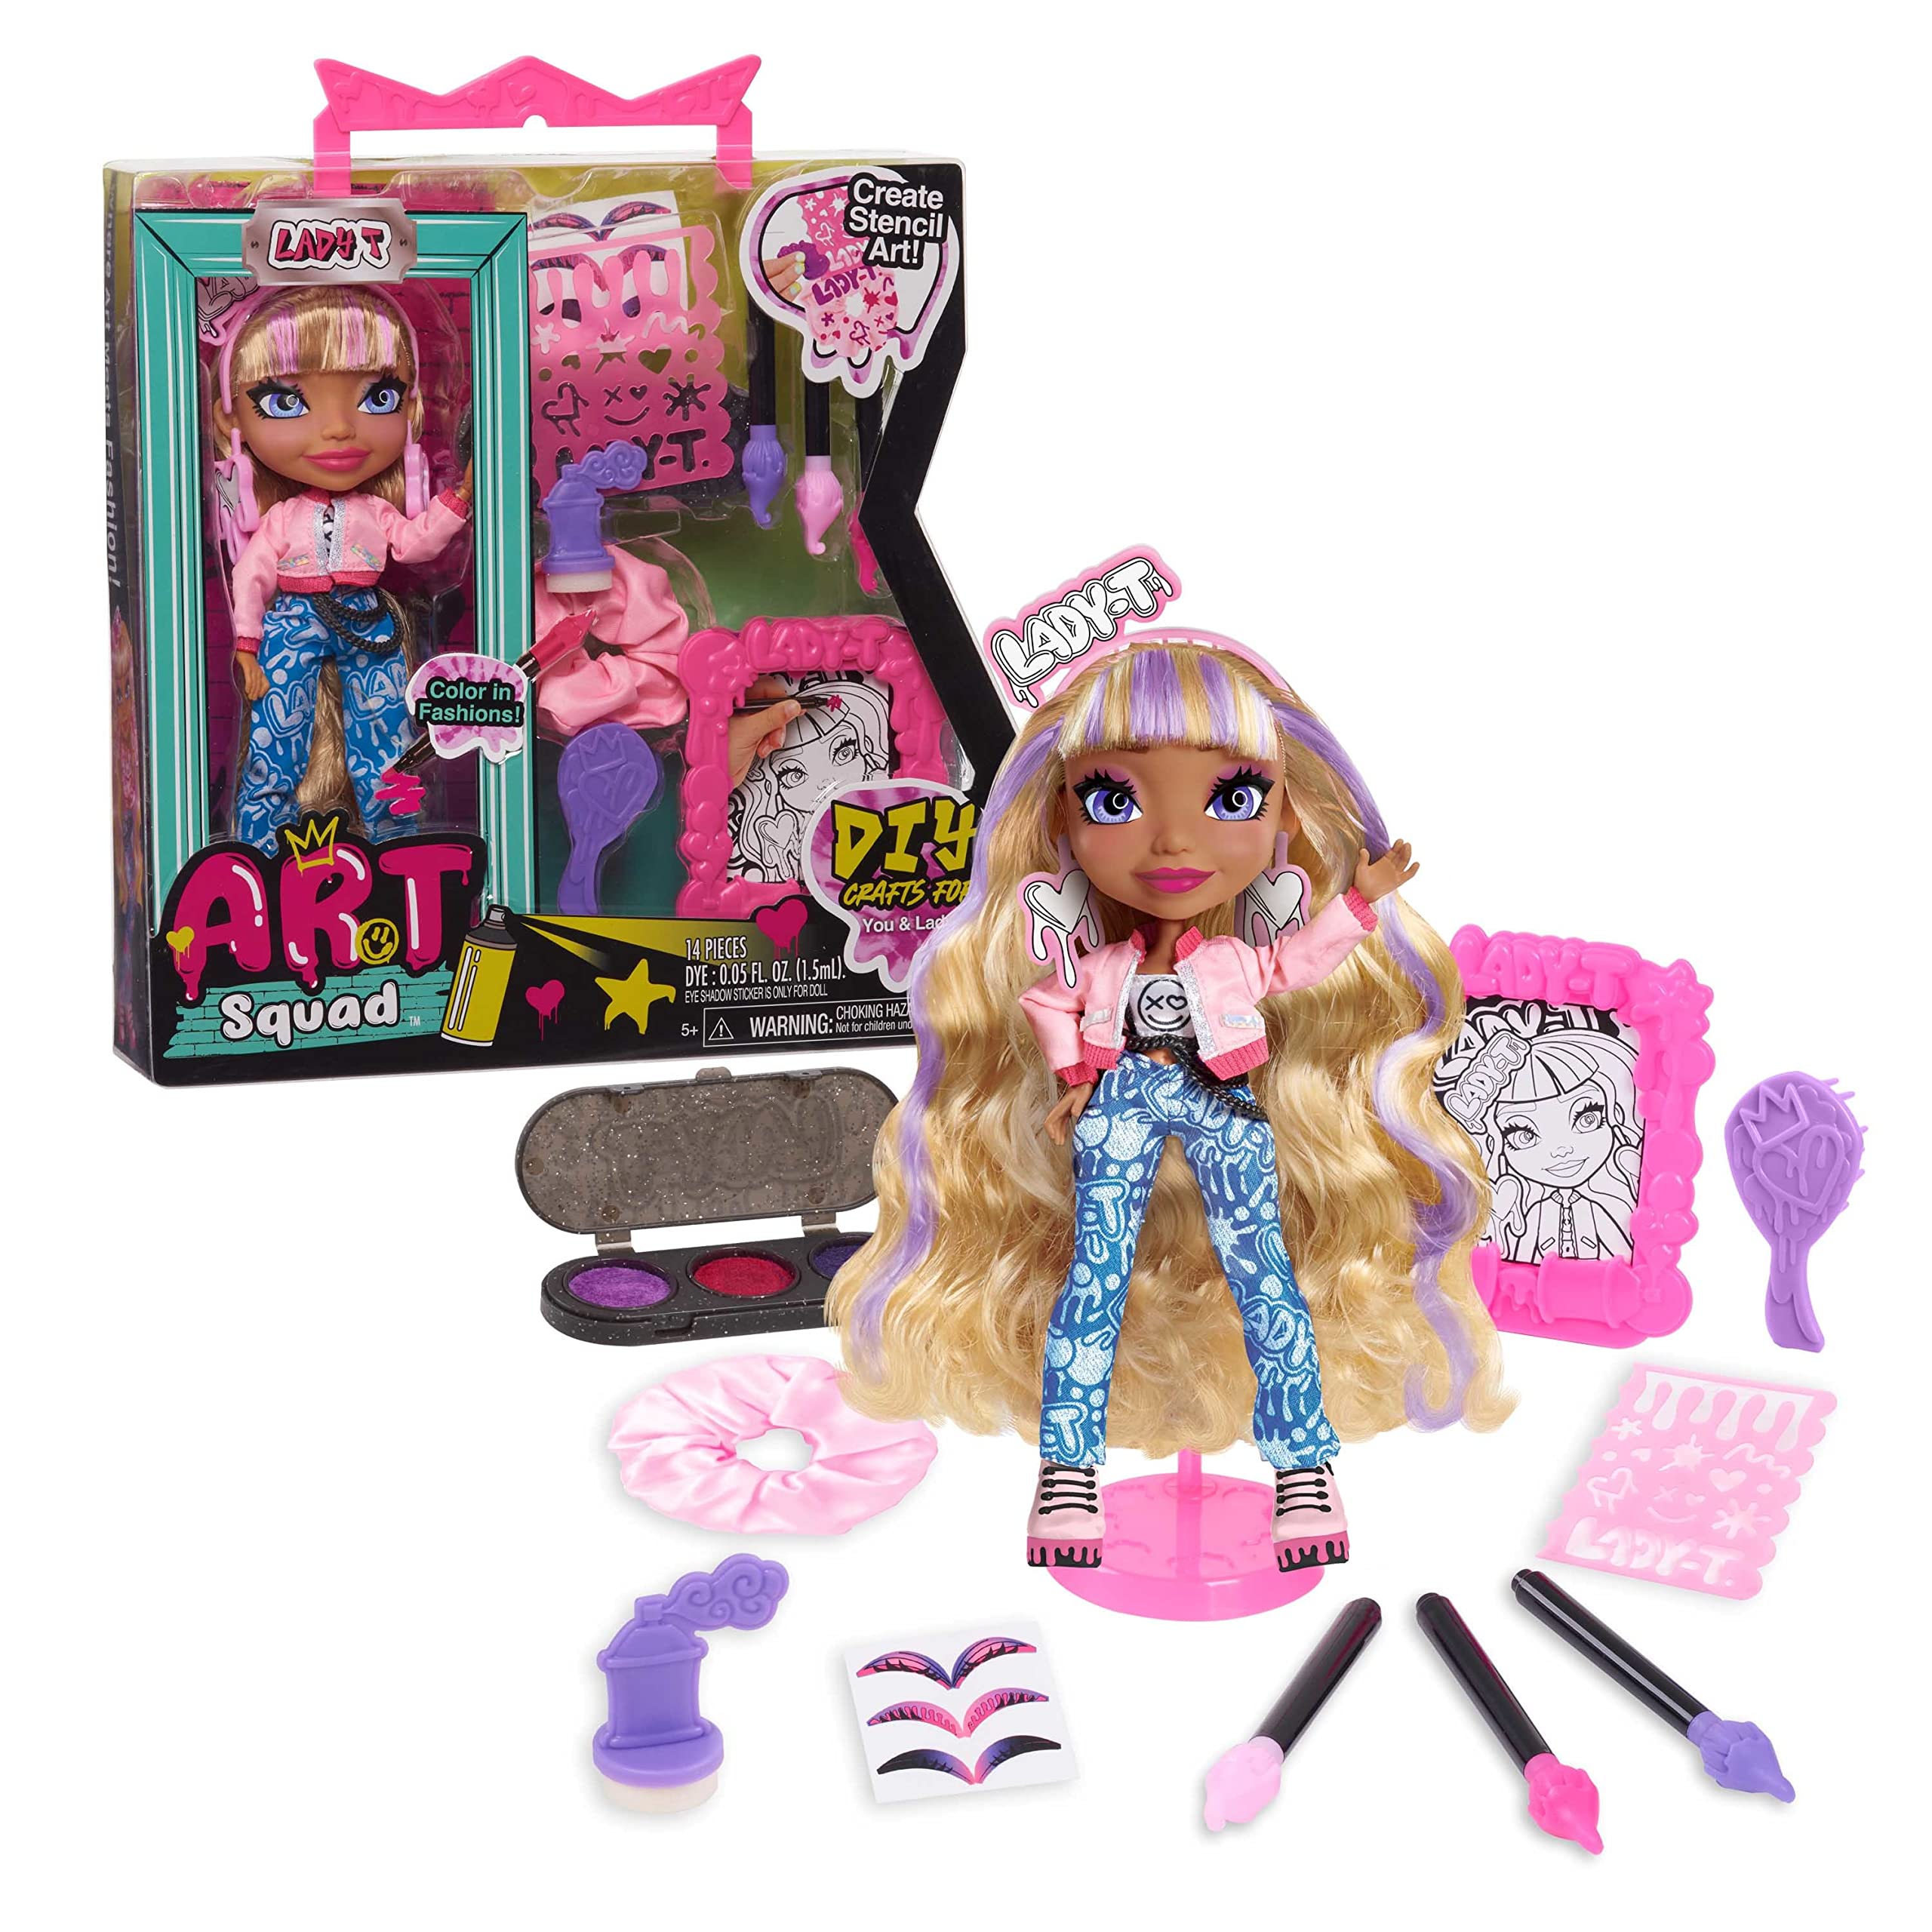 ART SQUAD Lady T 10-inch Doll & Accessories with DIY Craft Stencil Project, Kids Toys for Ages 3 Up, Gifts and Presents by Just Play